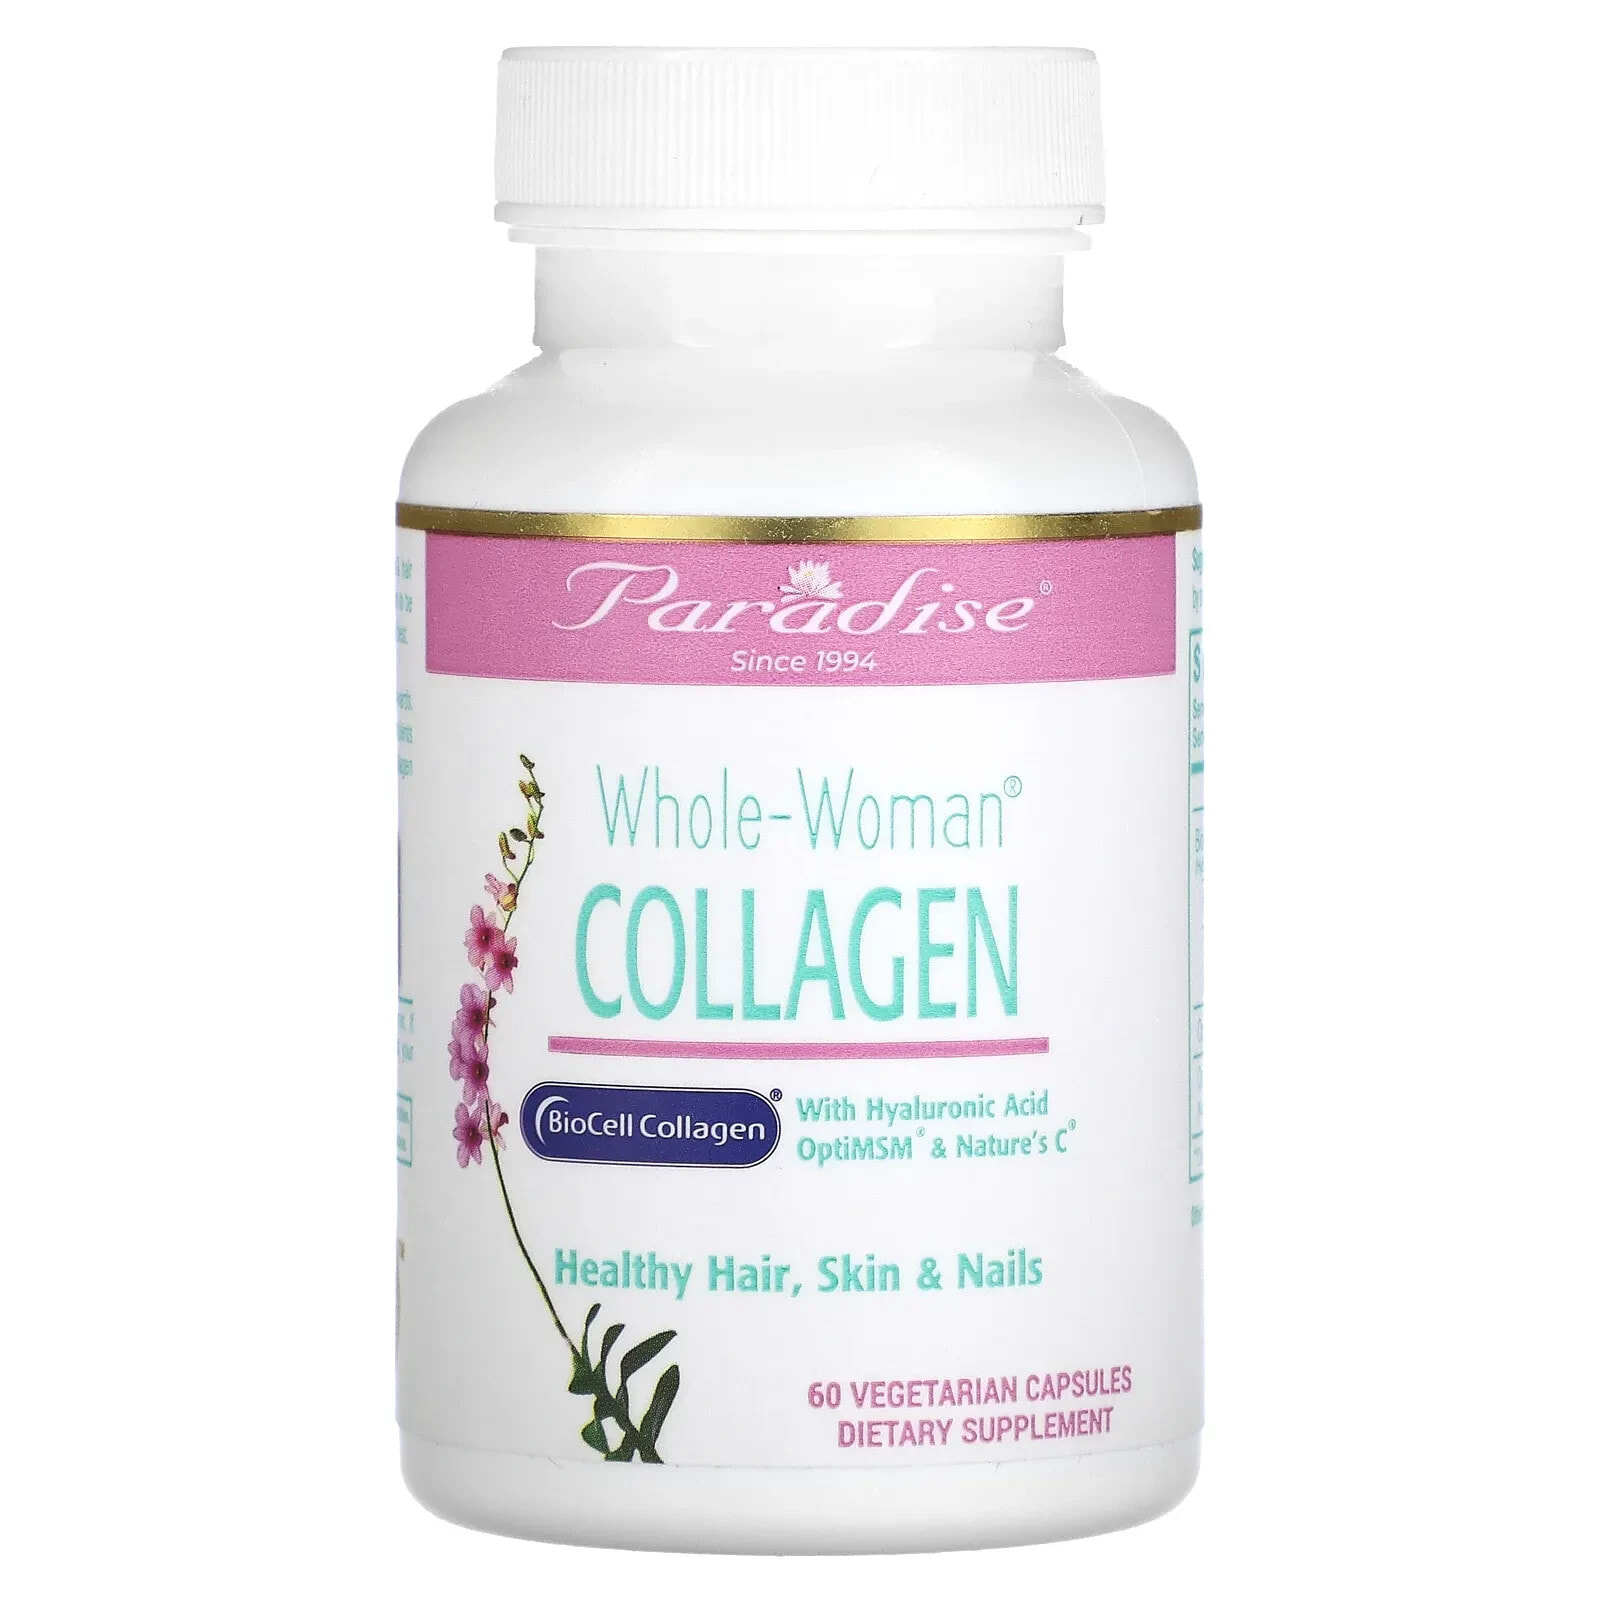 Paradise Herbs, Whole-Woman Collagen, 120 Vegetarian Capsules